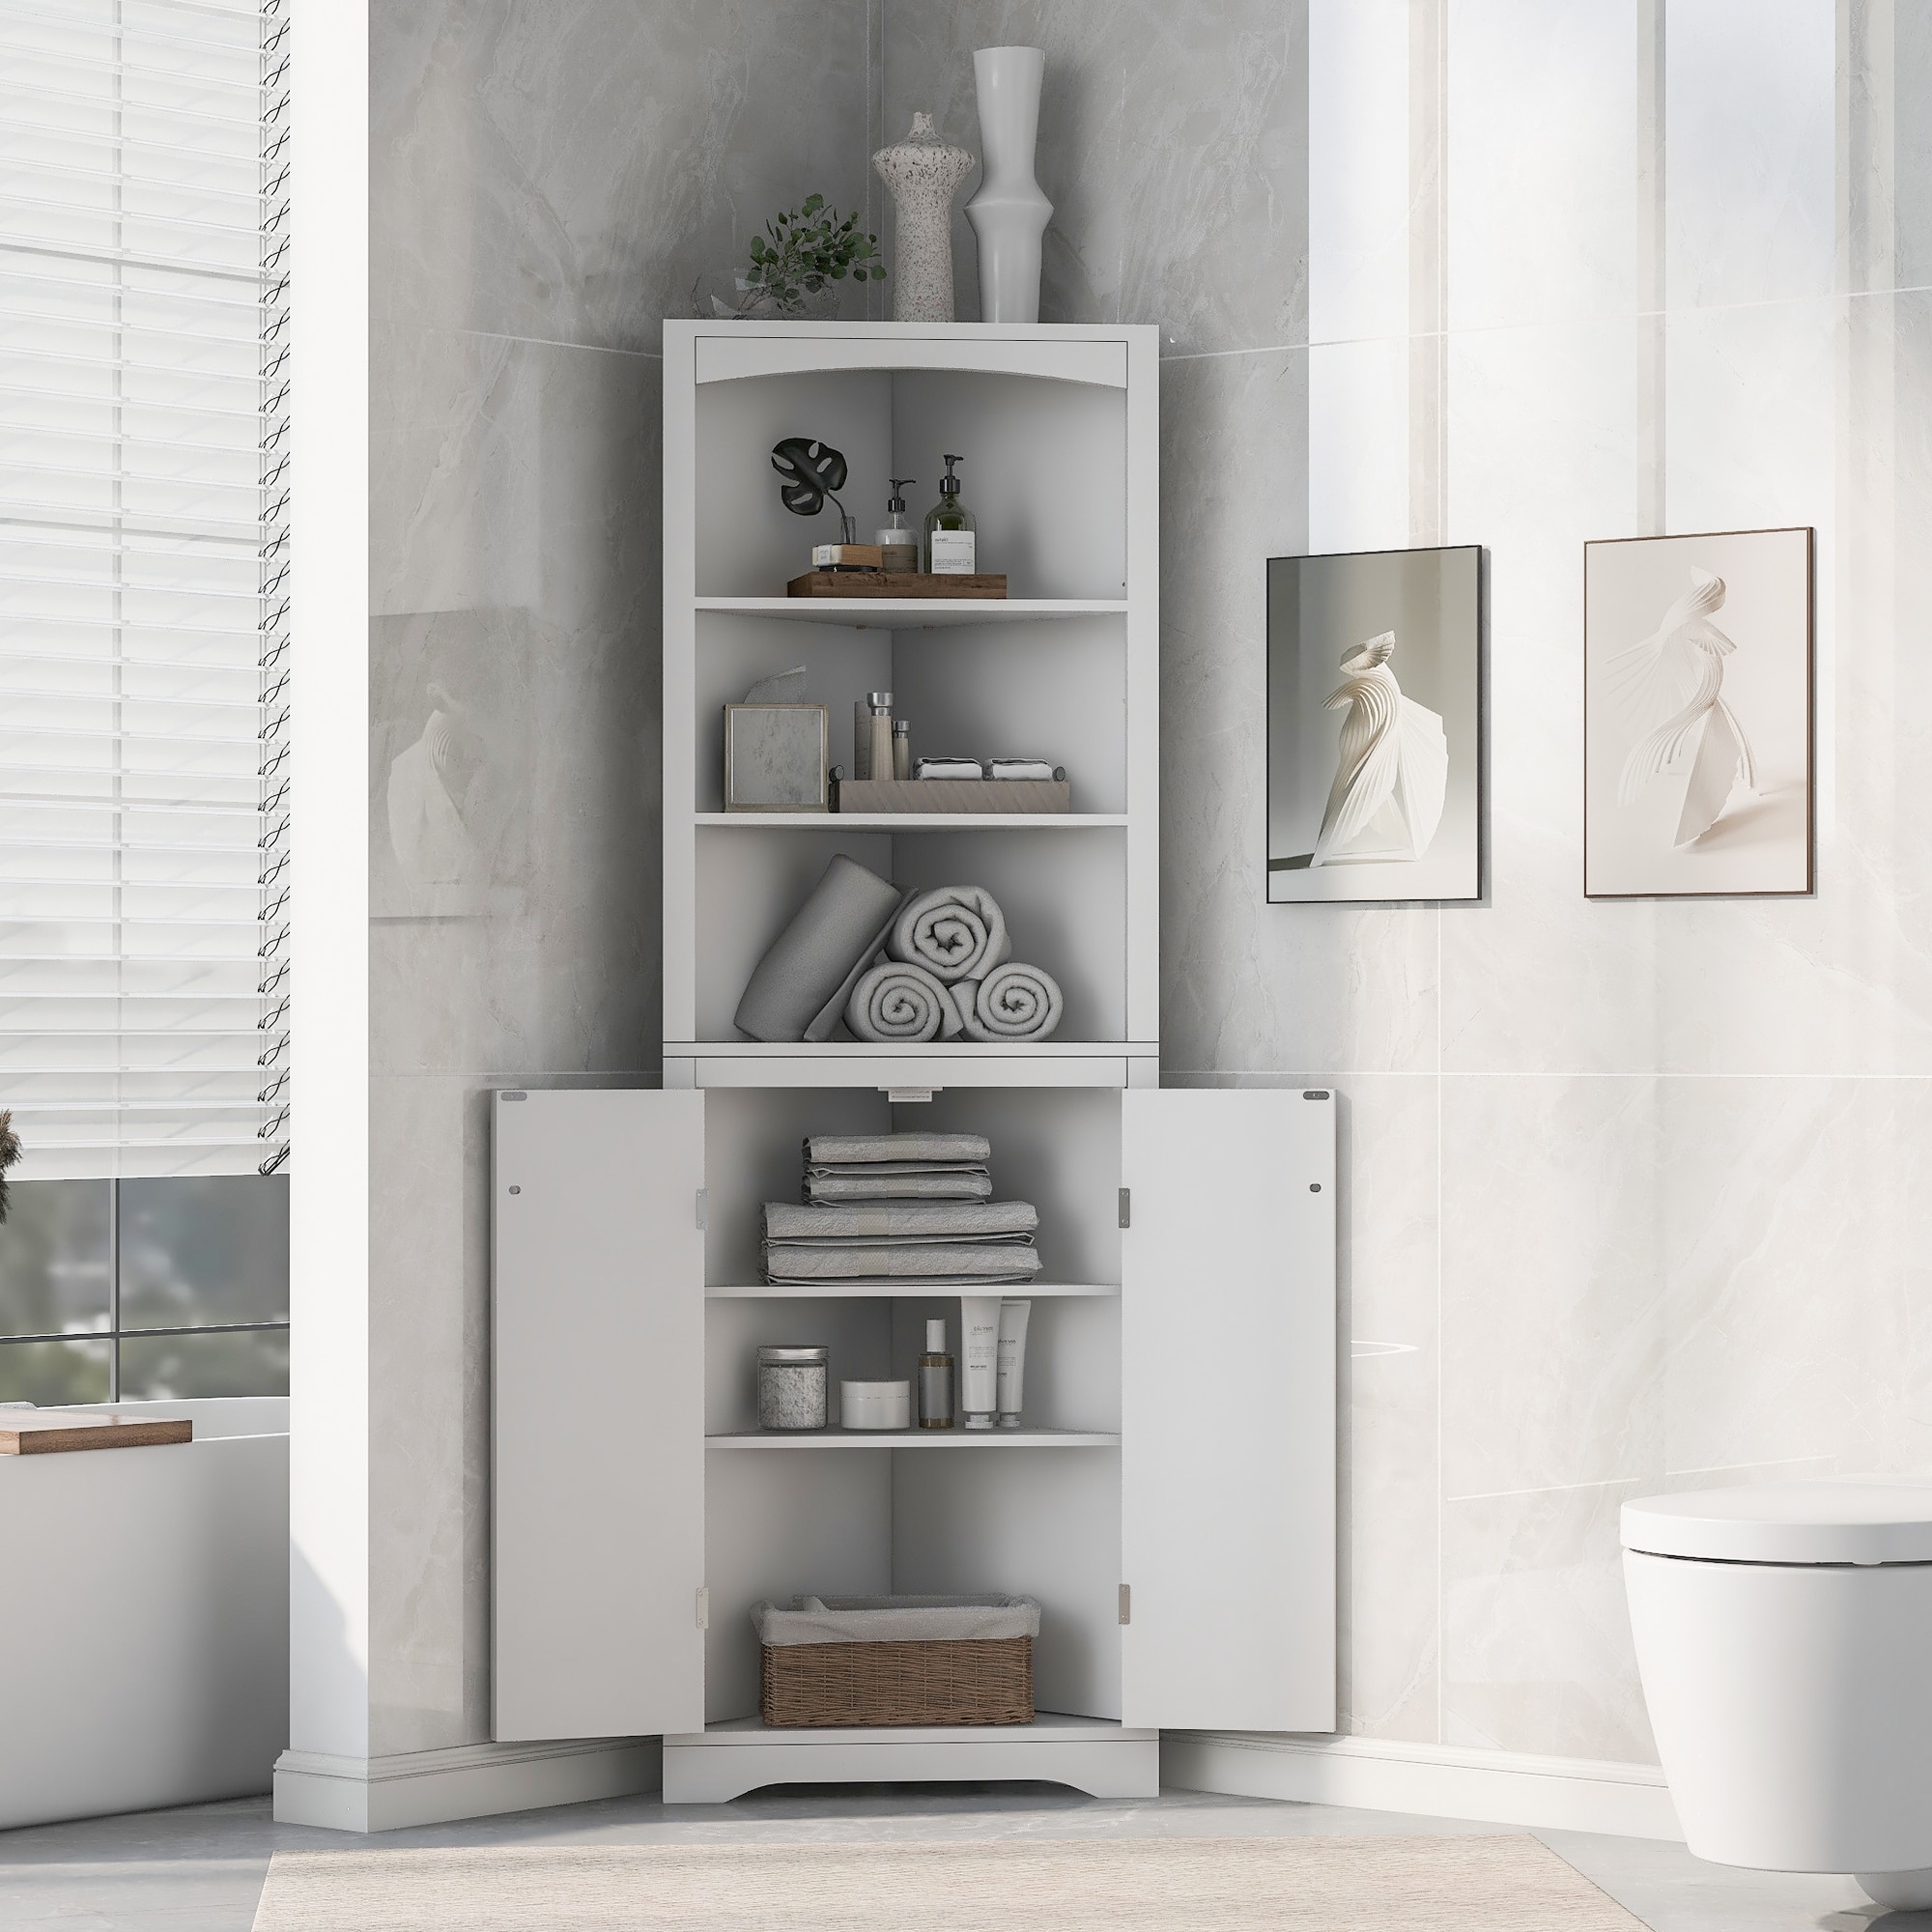 https://ak1.ostkcdn.com/images/products/is/images/direct/e755eb38949f9e499ecb4d9bcdd646835065f3a6/Bathroom-Storage-Corner-Cabinet-with-Adjustable-Shelves.jpg